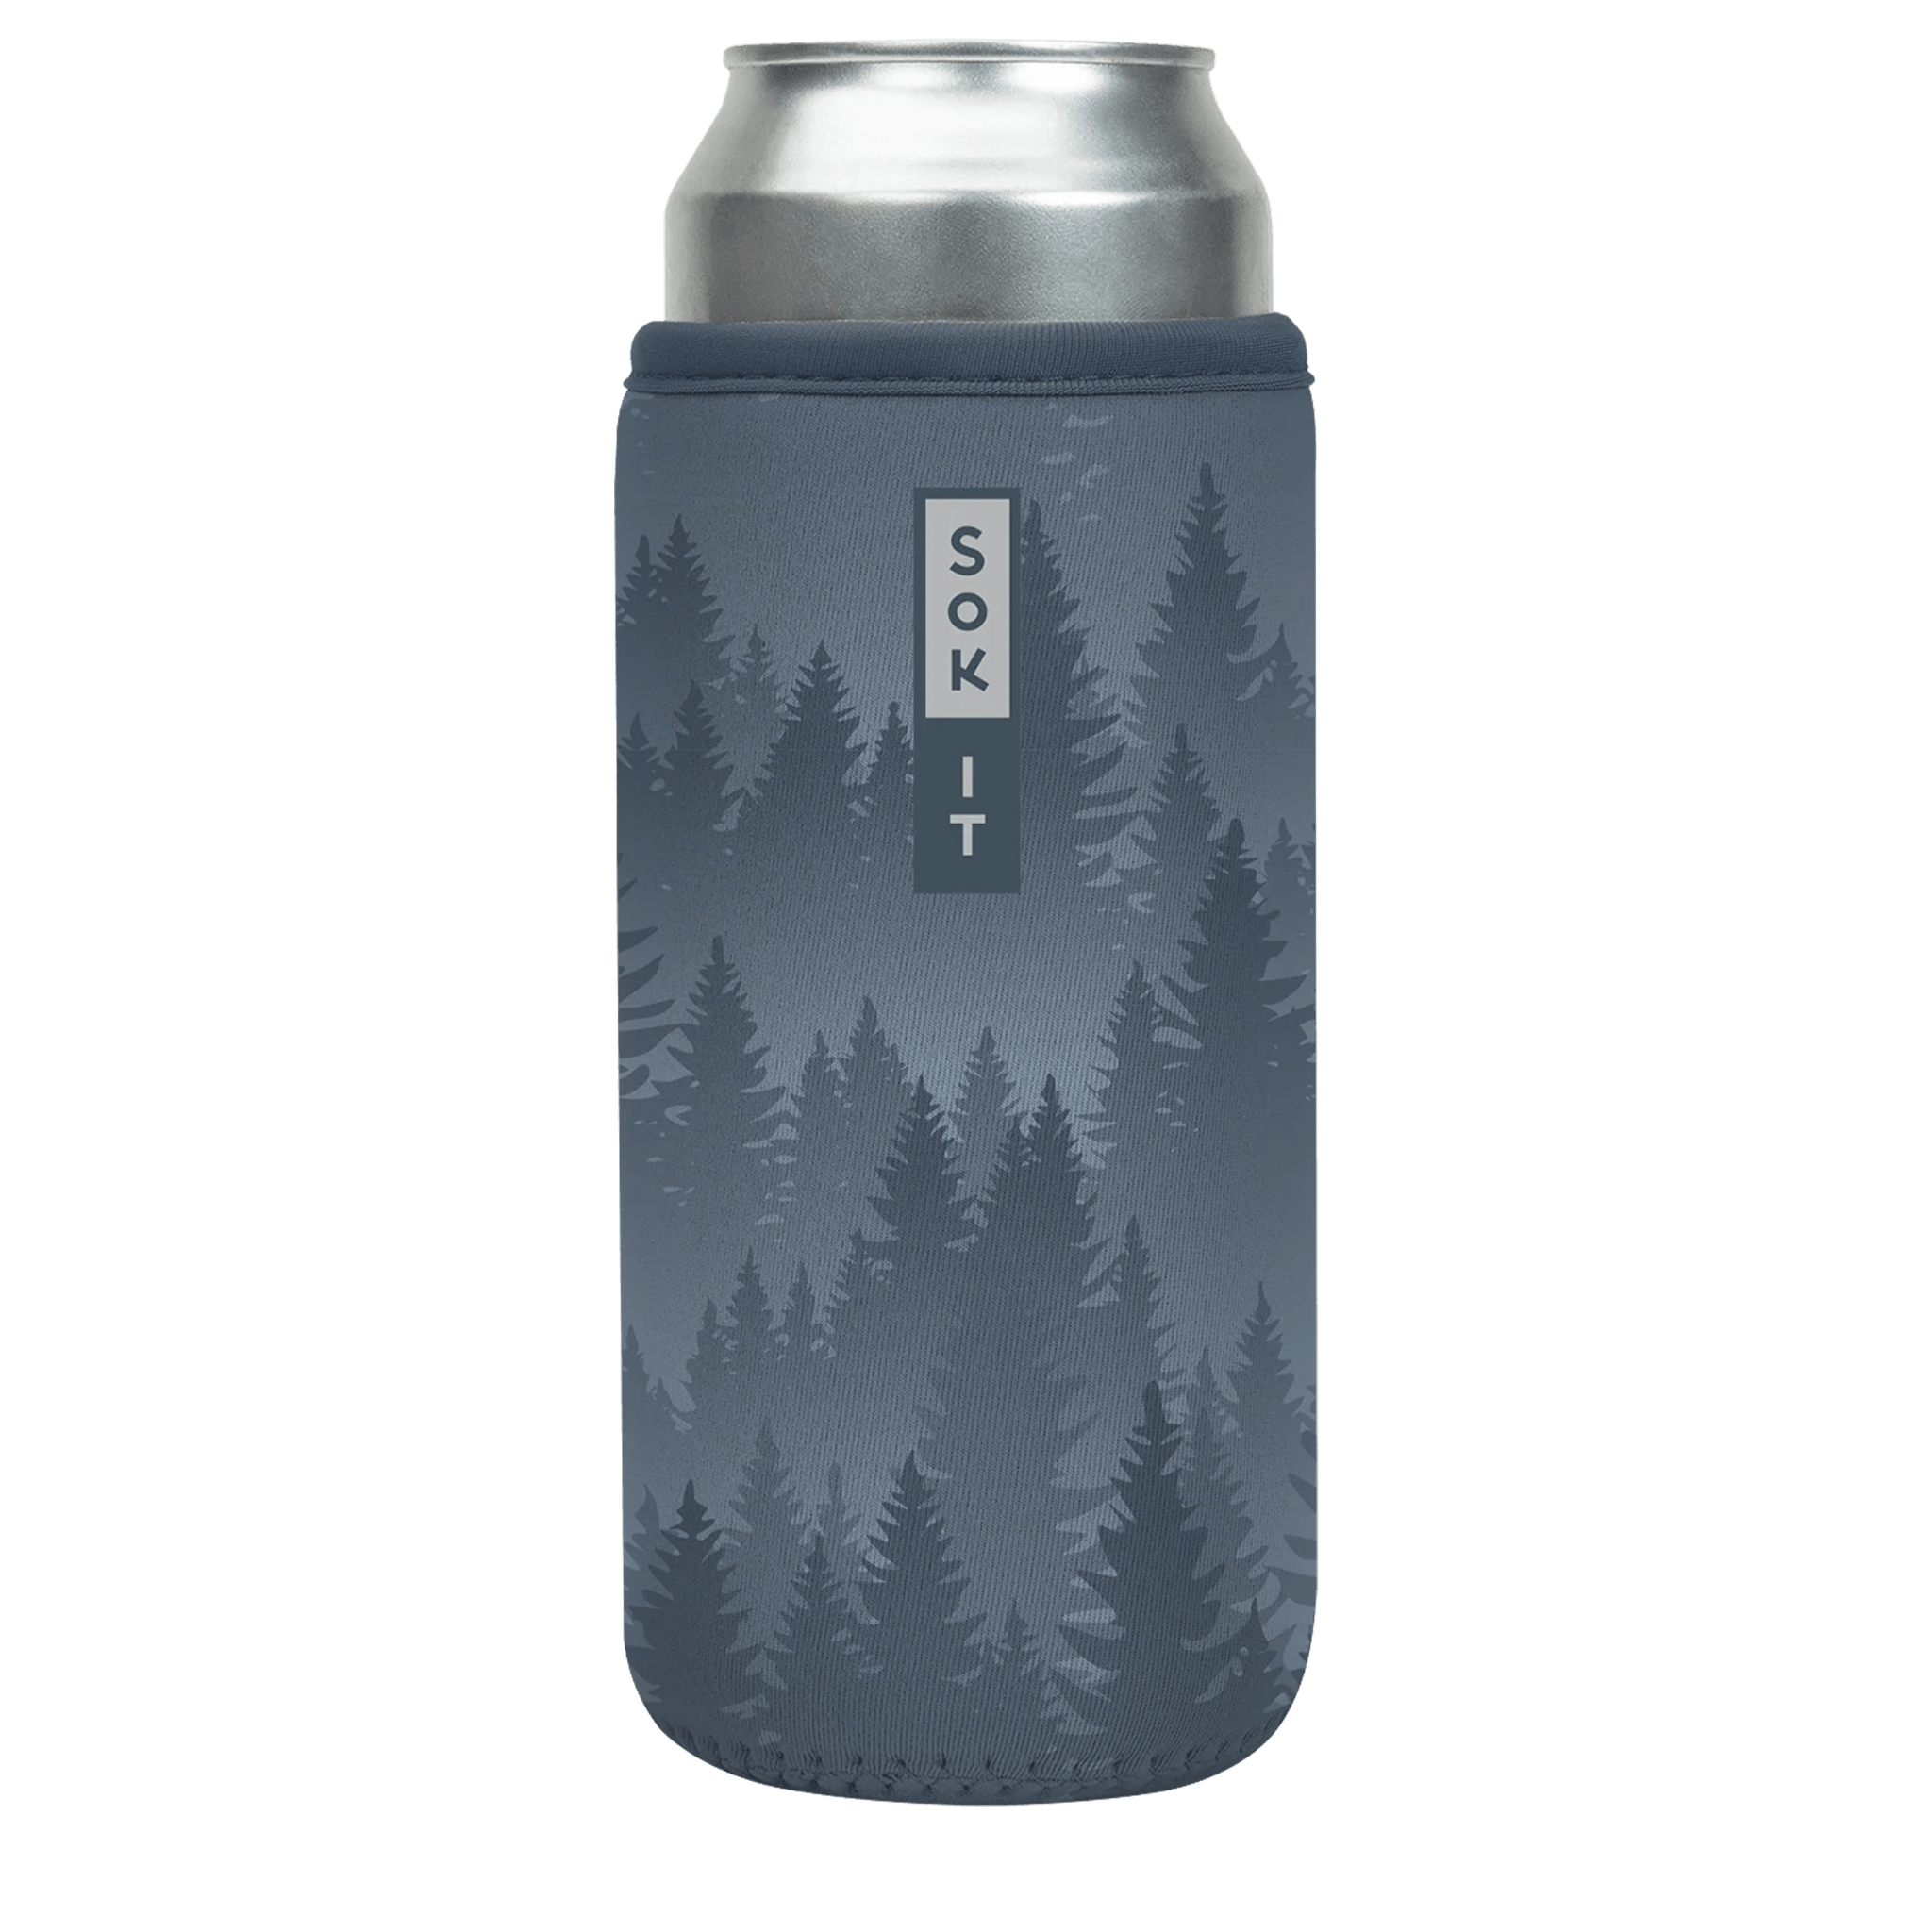 CanSok Foggy Woods 25oz Can